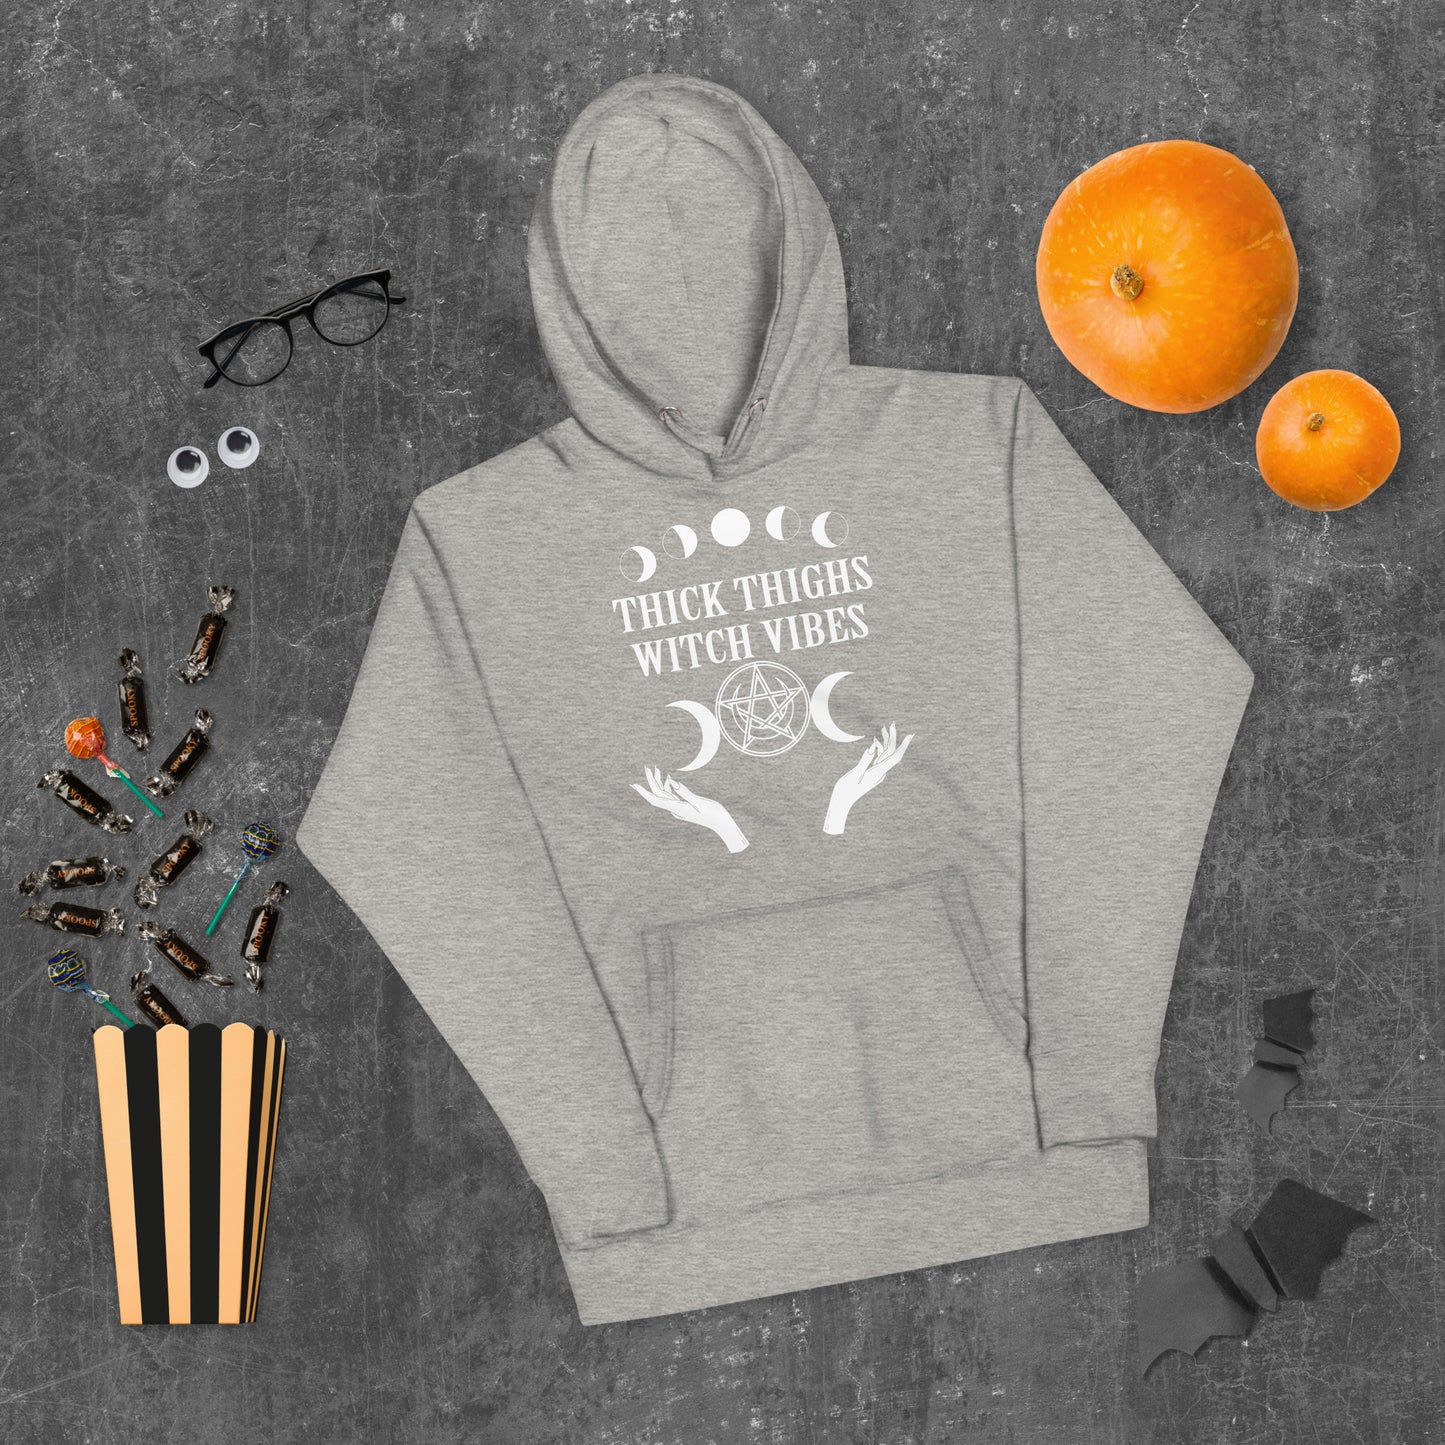 Thick Thighs & Witchy Vibes Unisex Hoodie